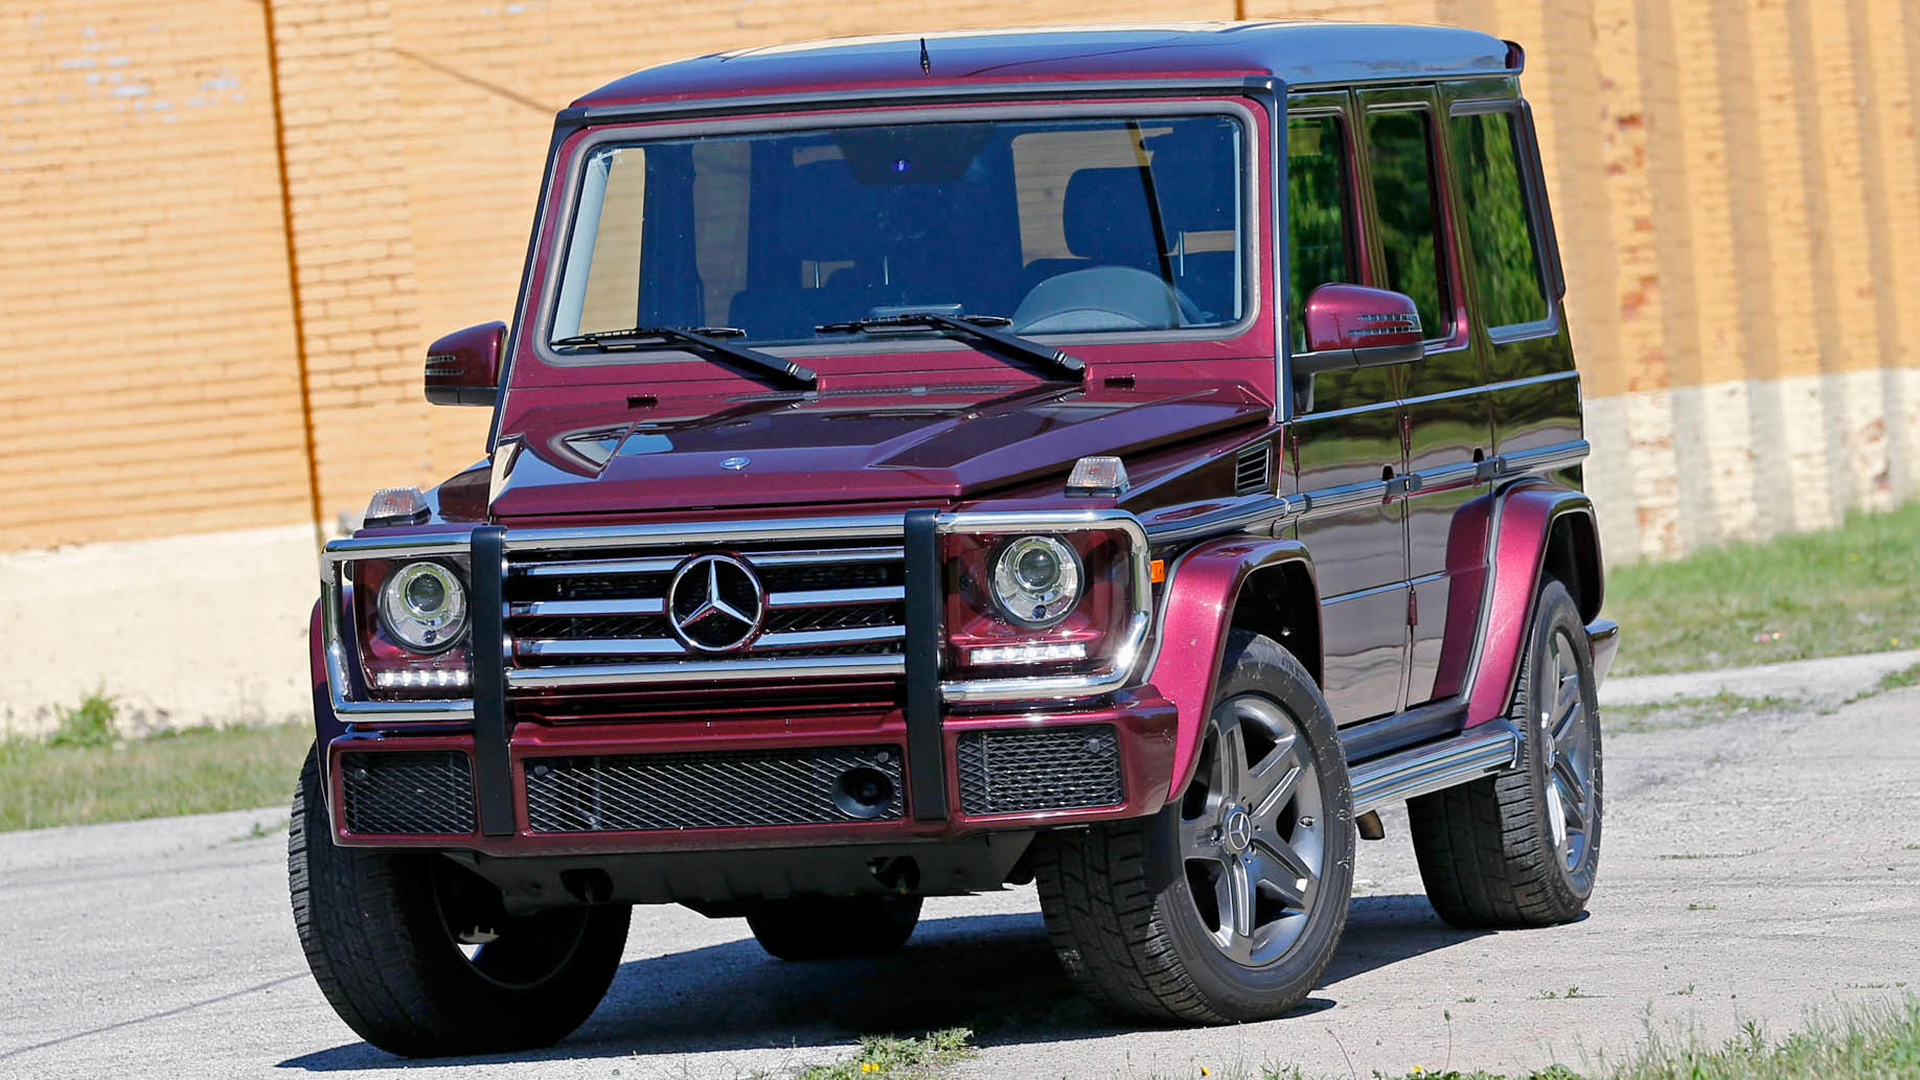 2016 Mercedes-Benz G-Class (US) - Wallpapers and HD Images | Car Pixel1920 x 1080